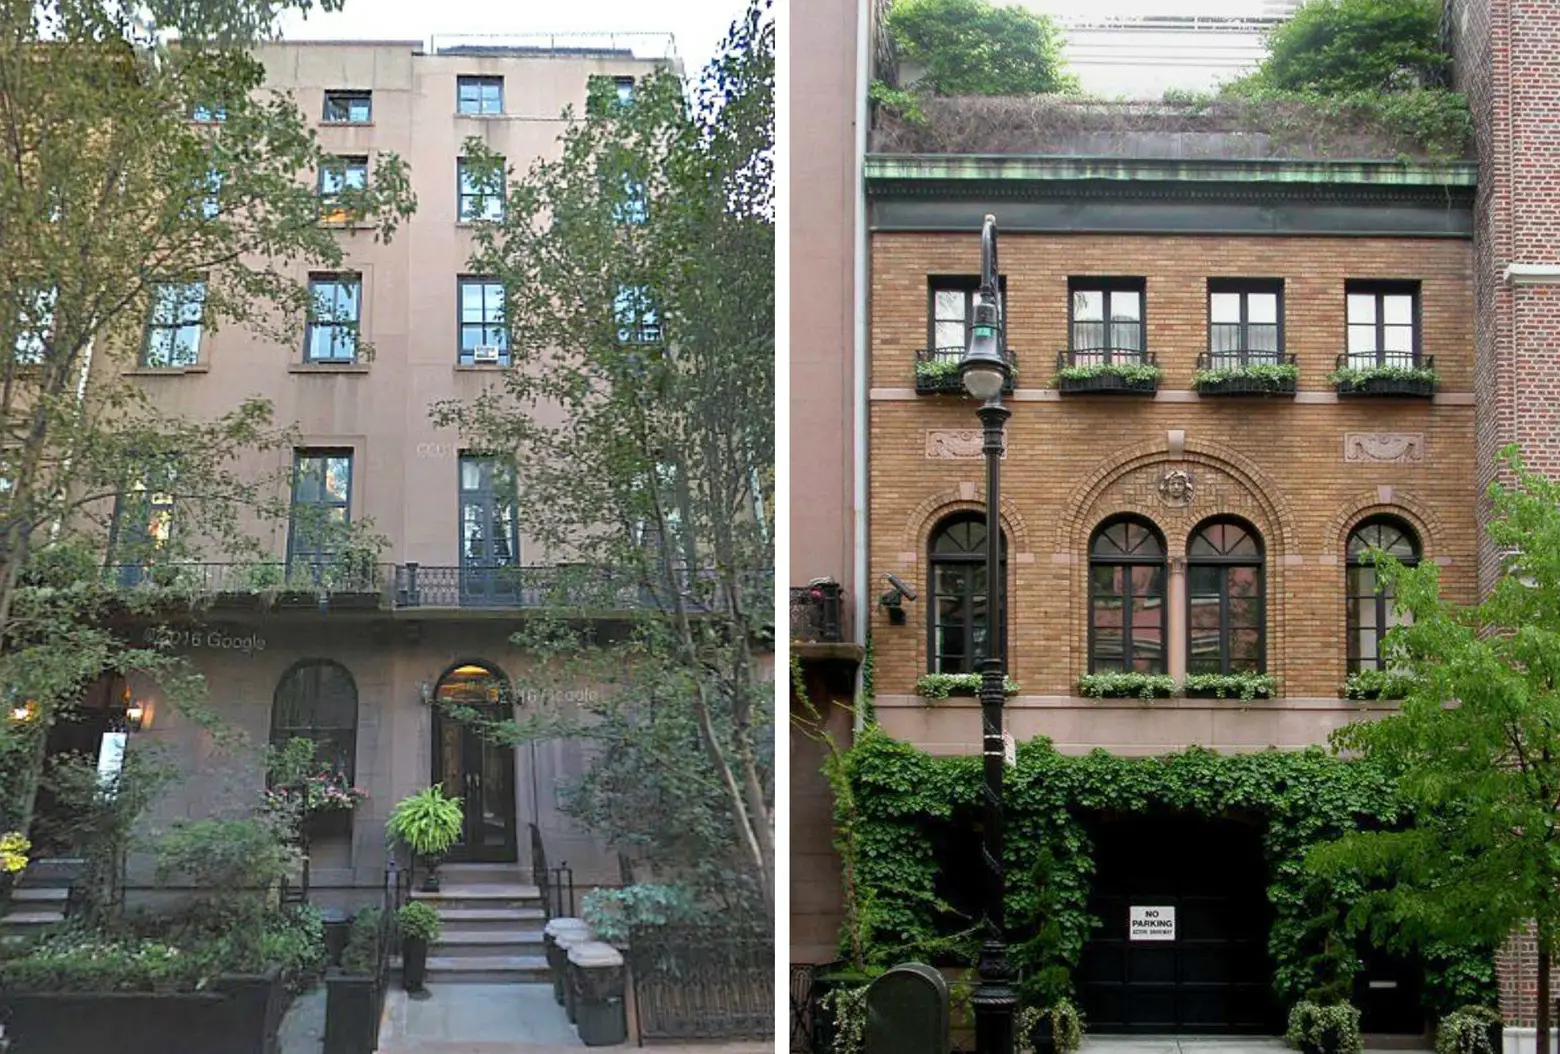 Facebook co-founder Sean Parker buys three Greenwich Village townhouses to create mega-mansion